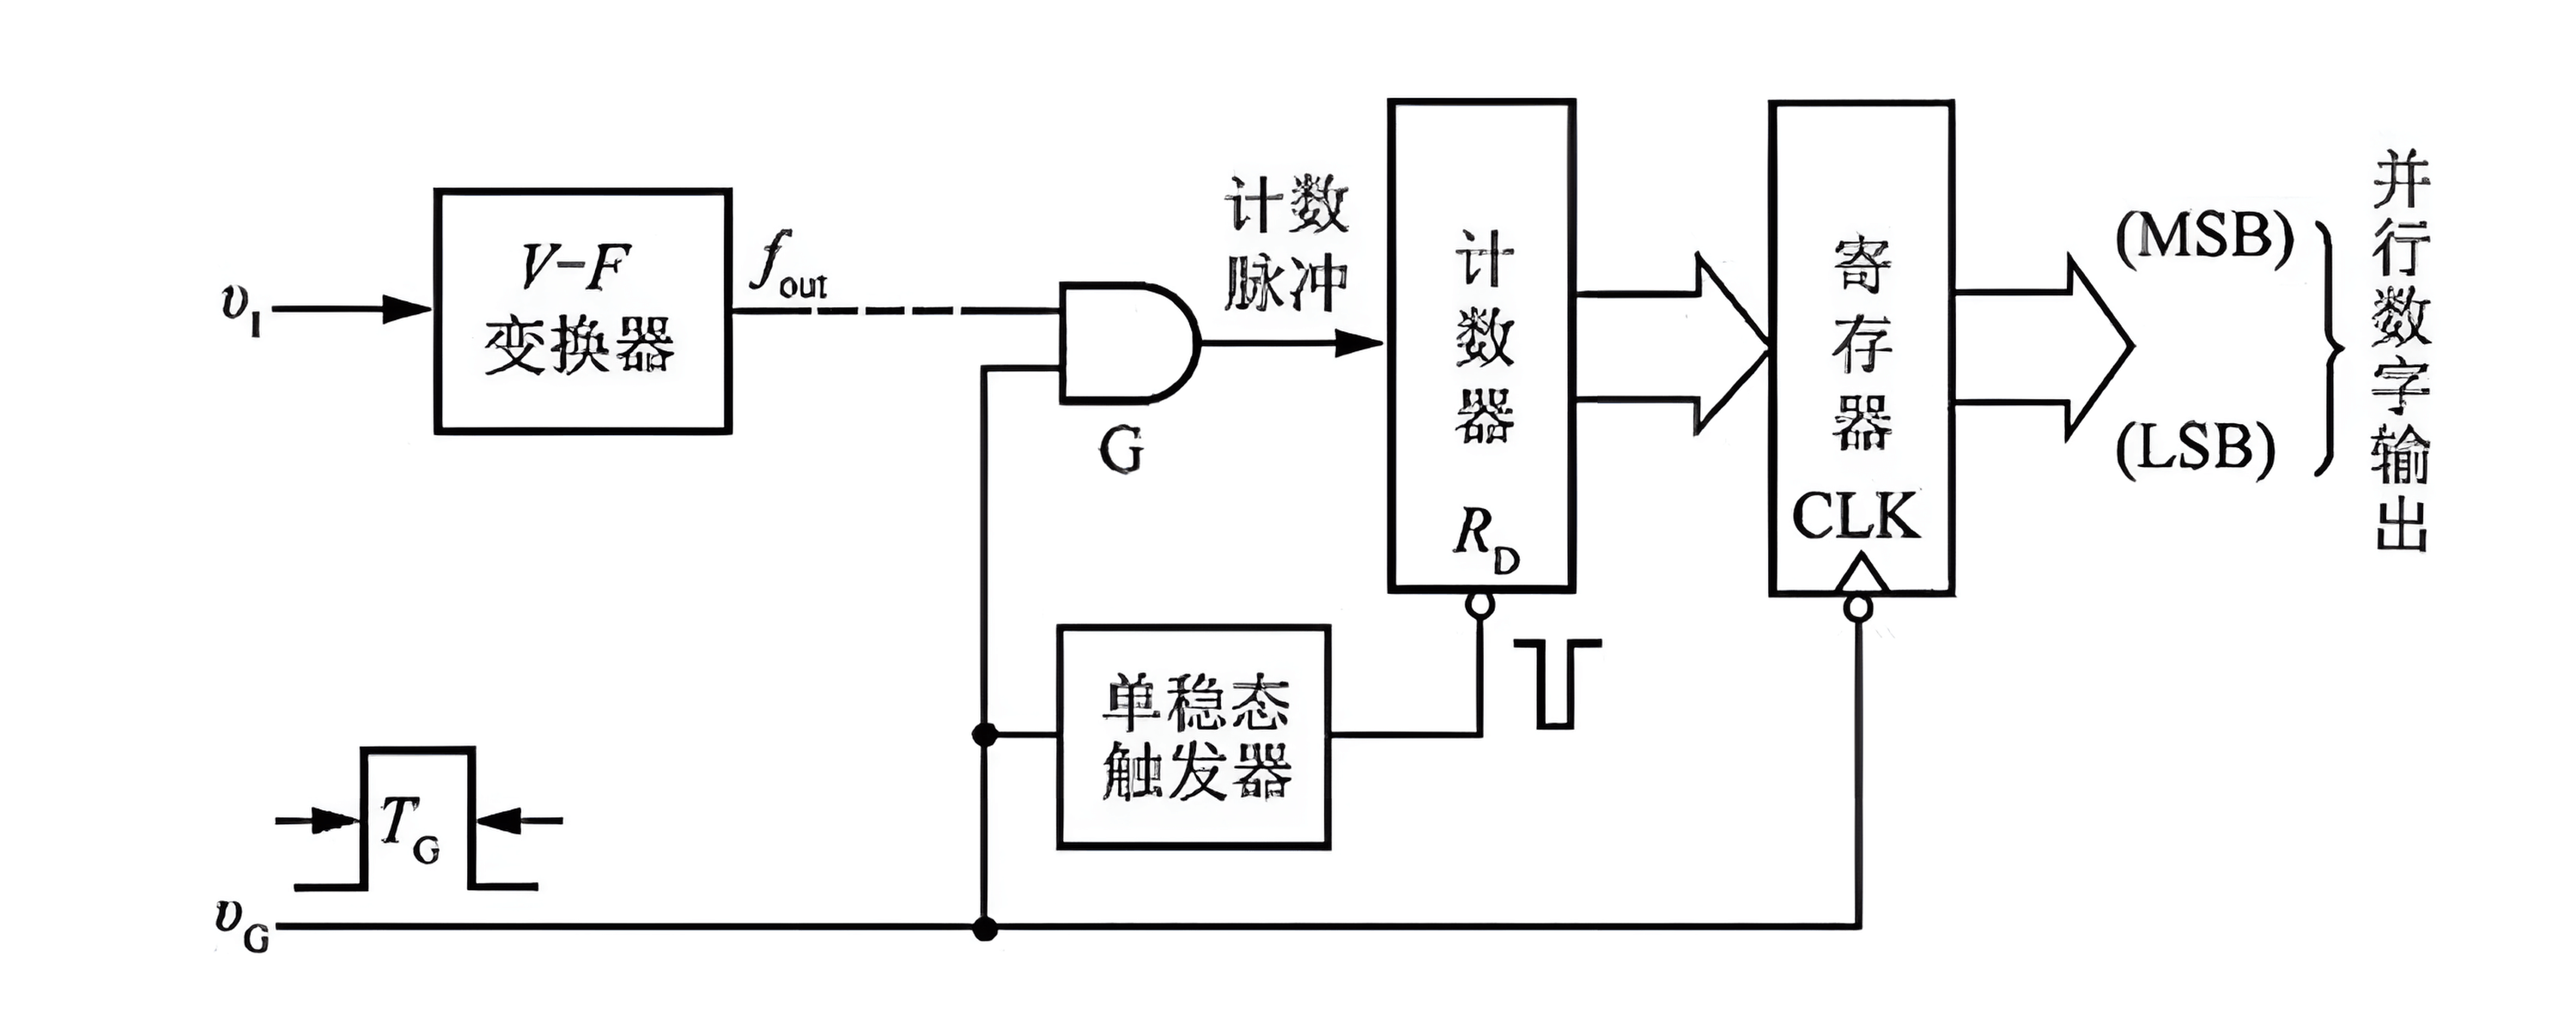 Voltage-Frequency Transformation ADC